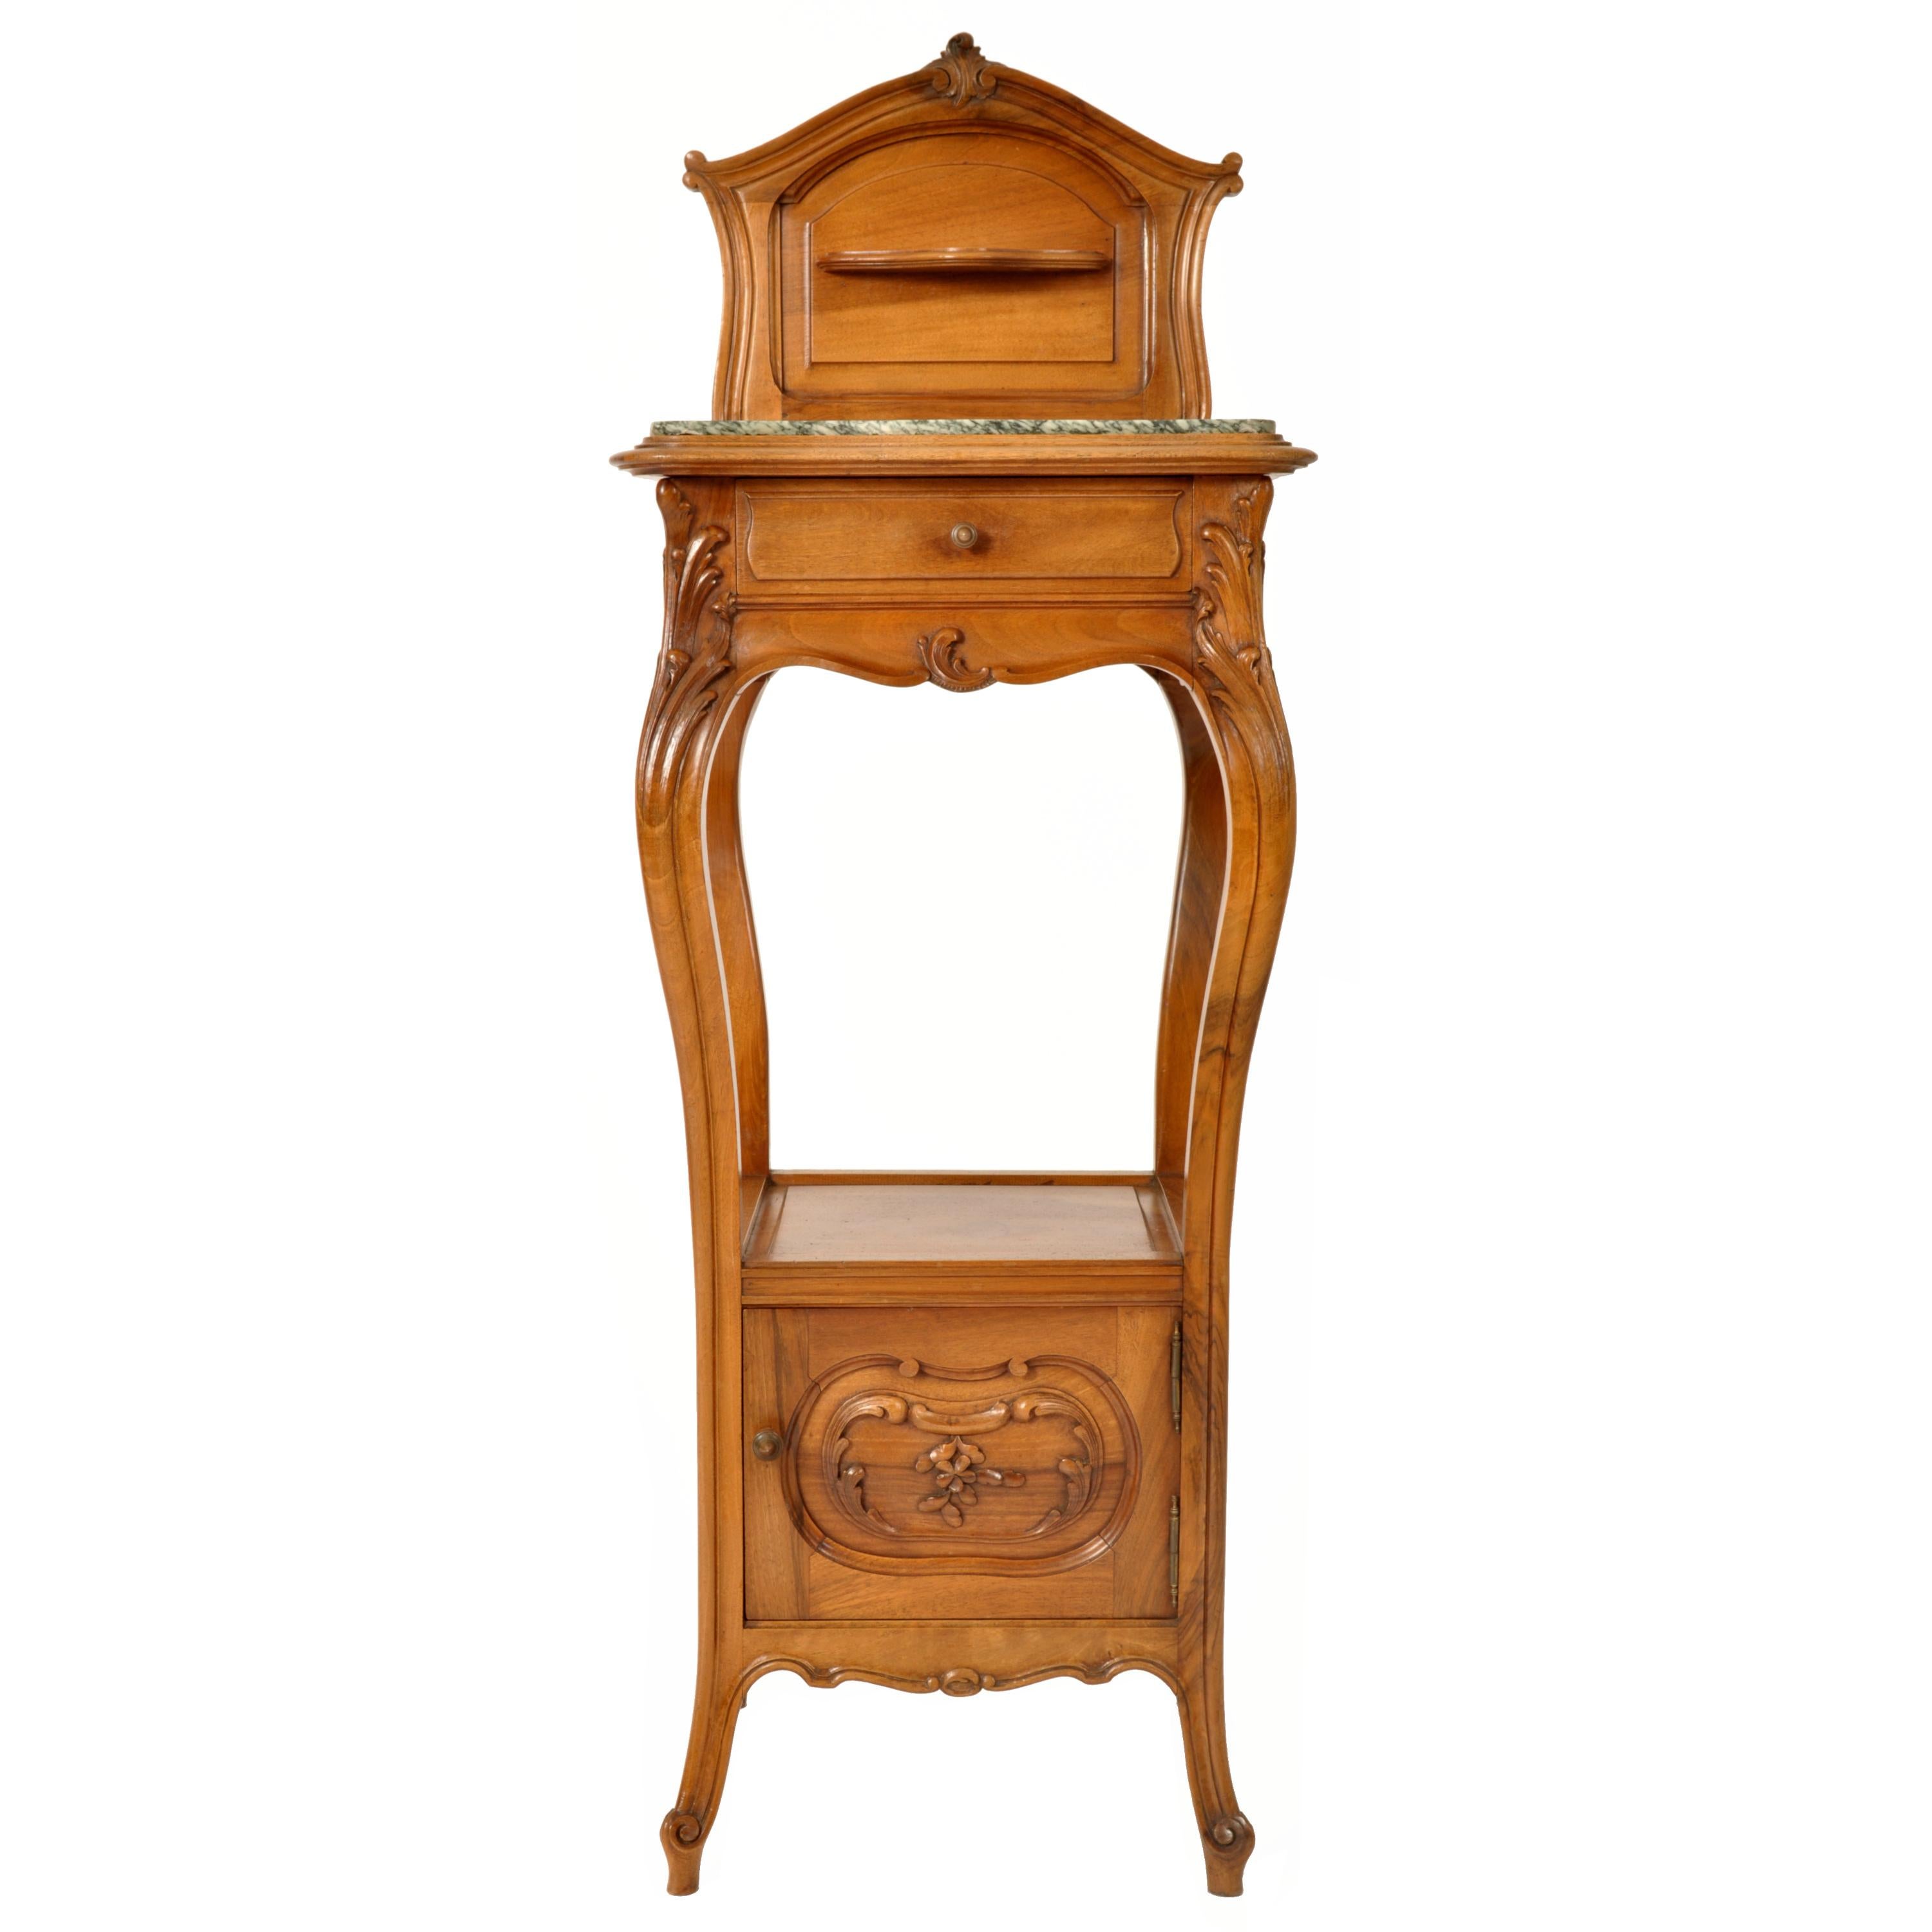 A very good antique walnut French Art Nouveau (in the Provincial manner), nightstand, side table, Circa 1900.
The stand having a carved backsplash with a small candle shelf, below is an inset variegated marble top, below this is a single drawer. The